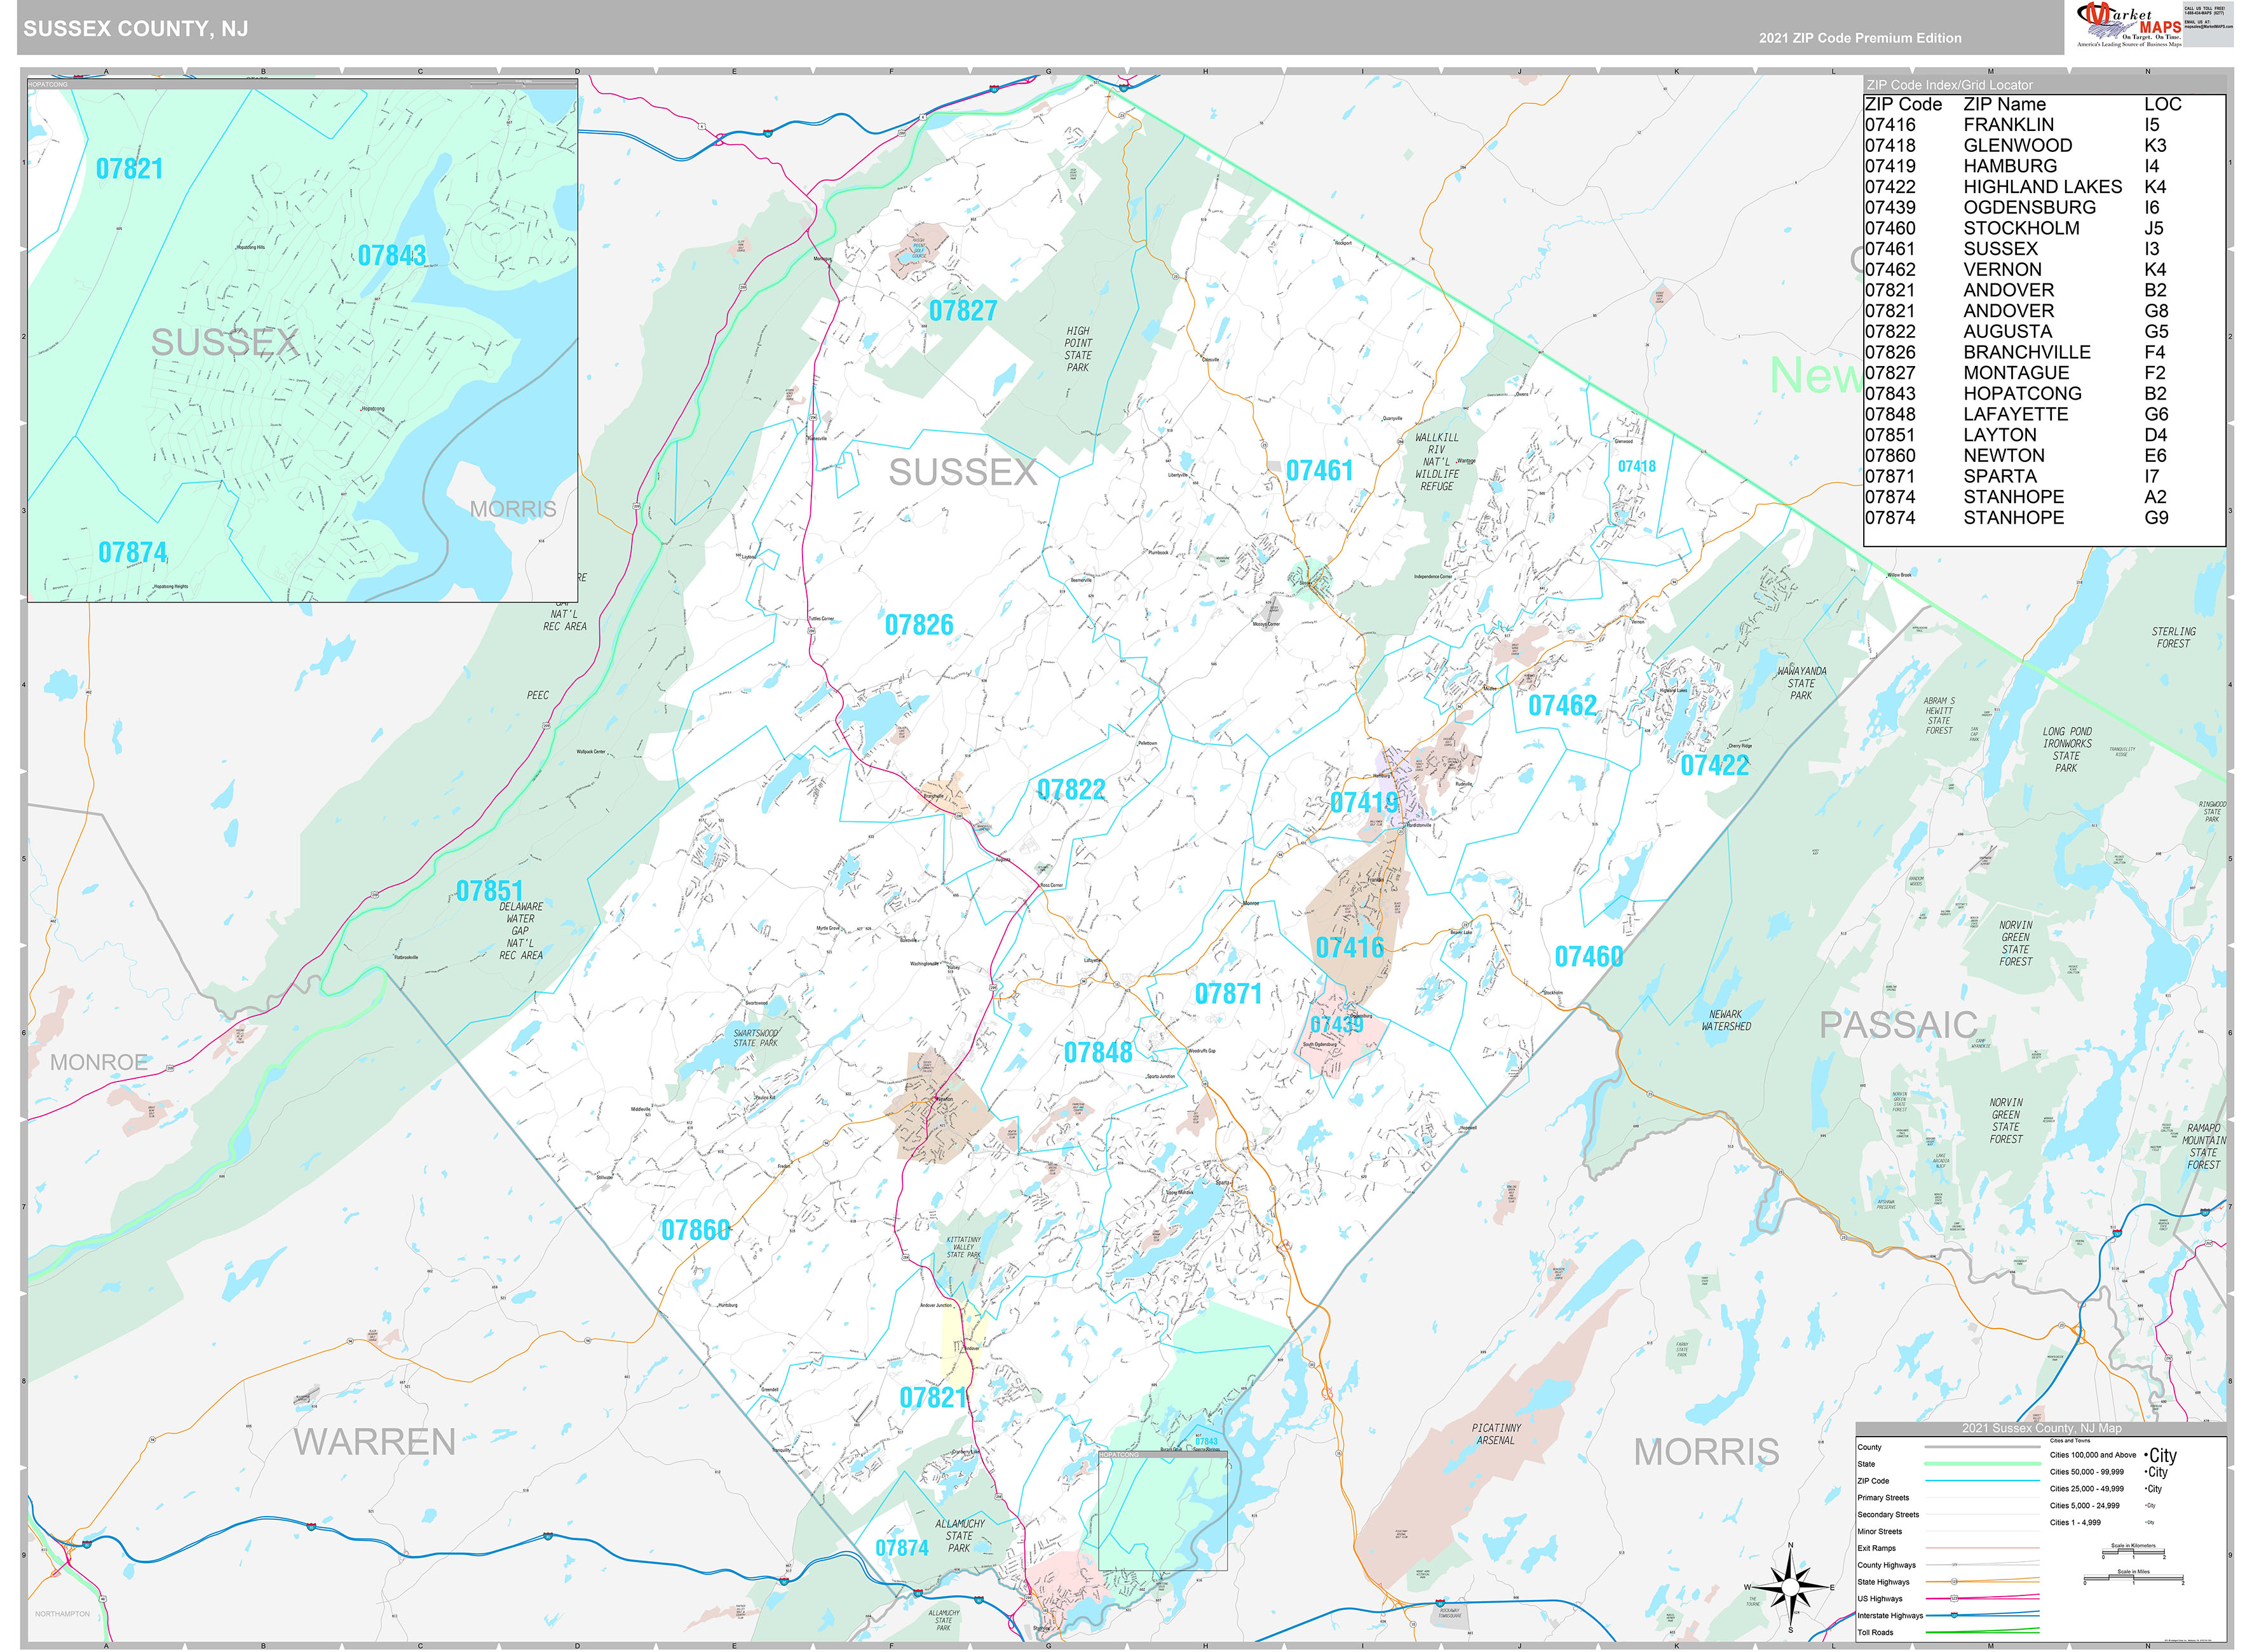 Sussex County, NJ Wall Map Premium Style by MarketMAPS - MapSales